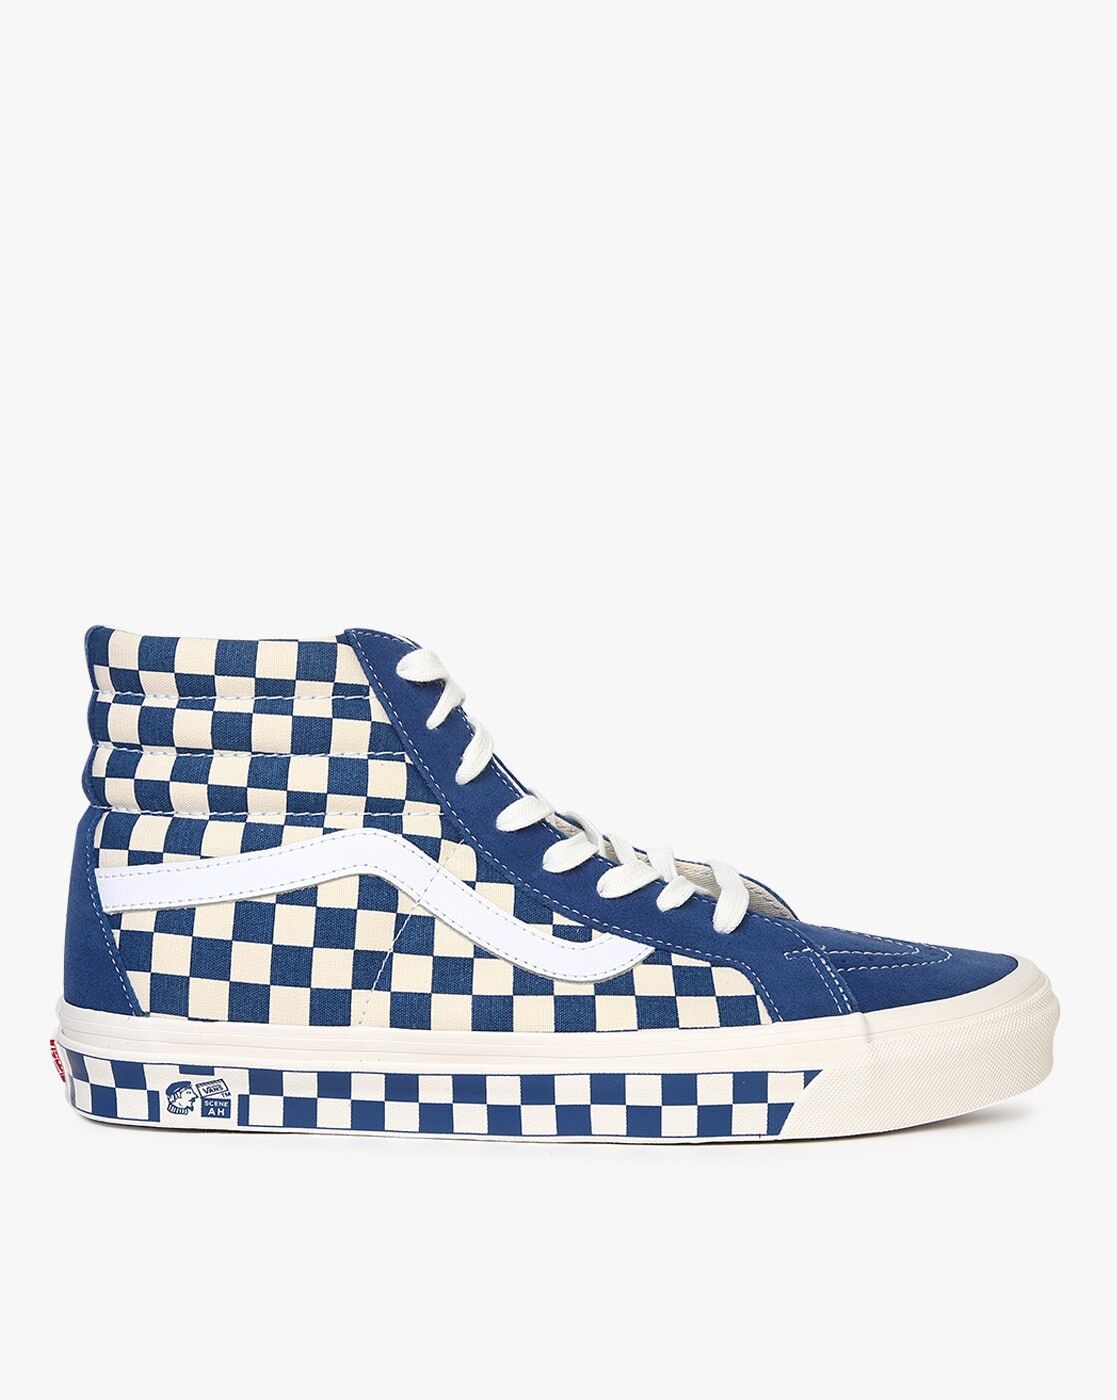 SK8-Hi 38 DX Checked Lace-Up Casual Shoes-Vn0a38gf2u81